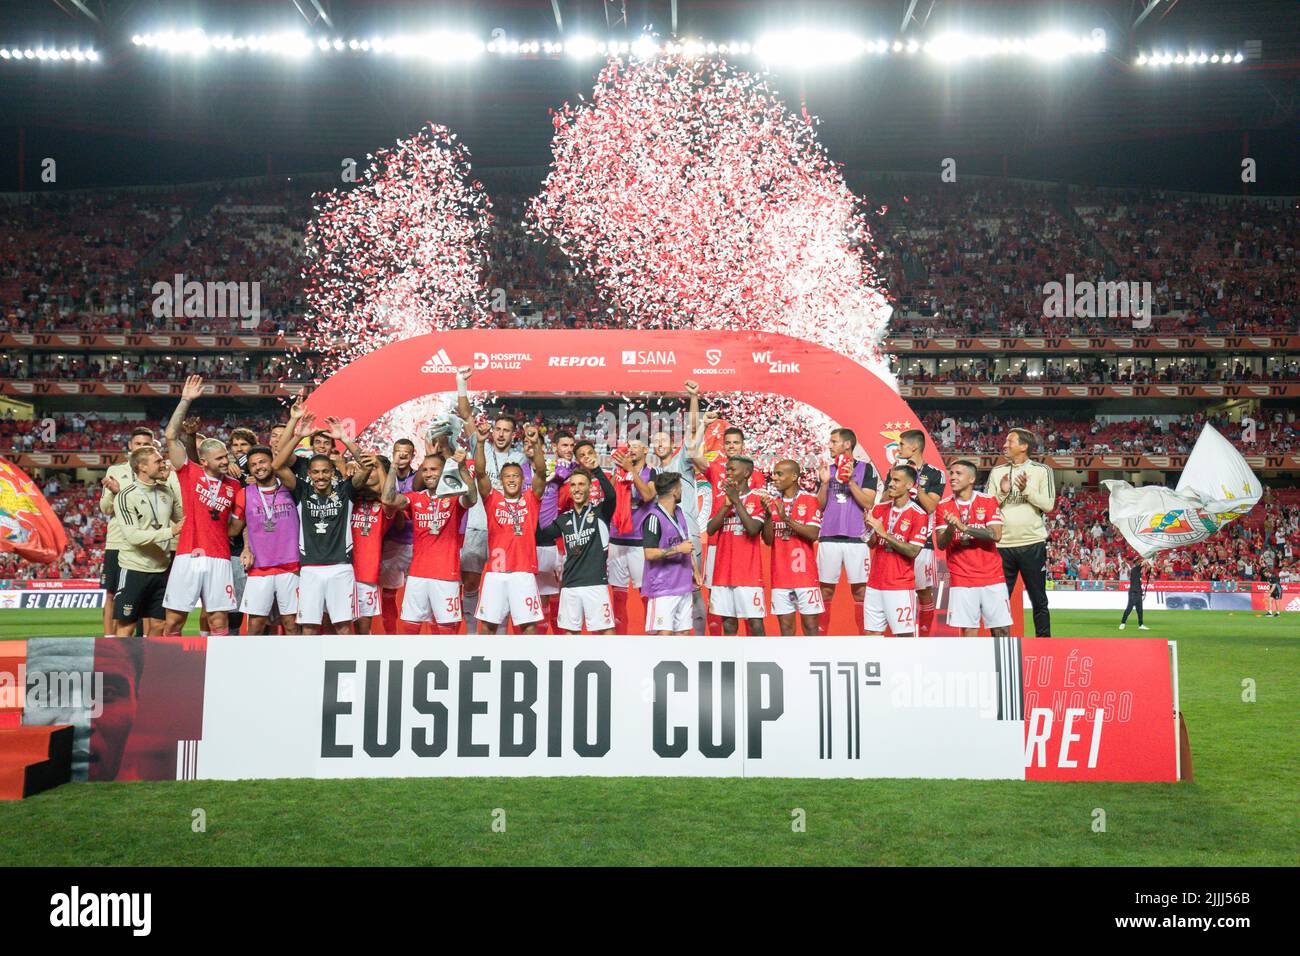 Lisbon, Portugal. July 26, 2022.  Benfica's defender from Argentina Nicolas Otamendi (30) lifting the Eusebio Cup trophy during the friendly game between SL Benfica vs Newcastle United FC Credit: Alexandre de Sousa/Alamy Live News Stock Photo